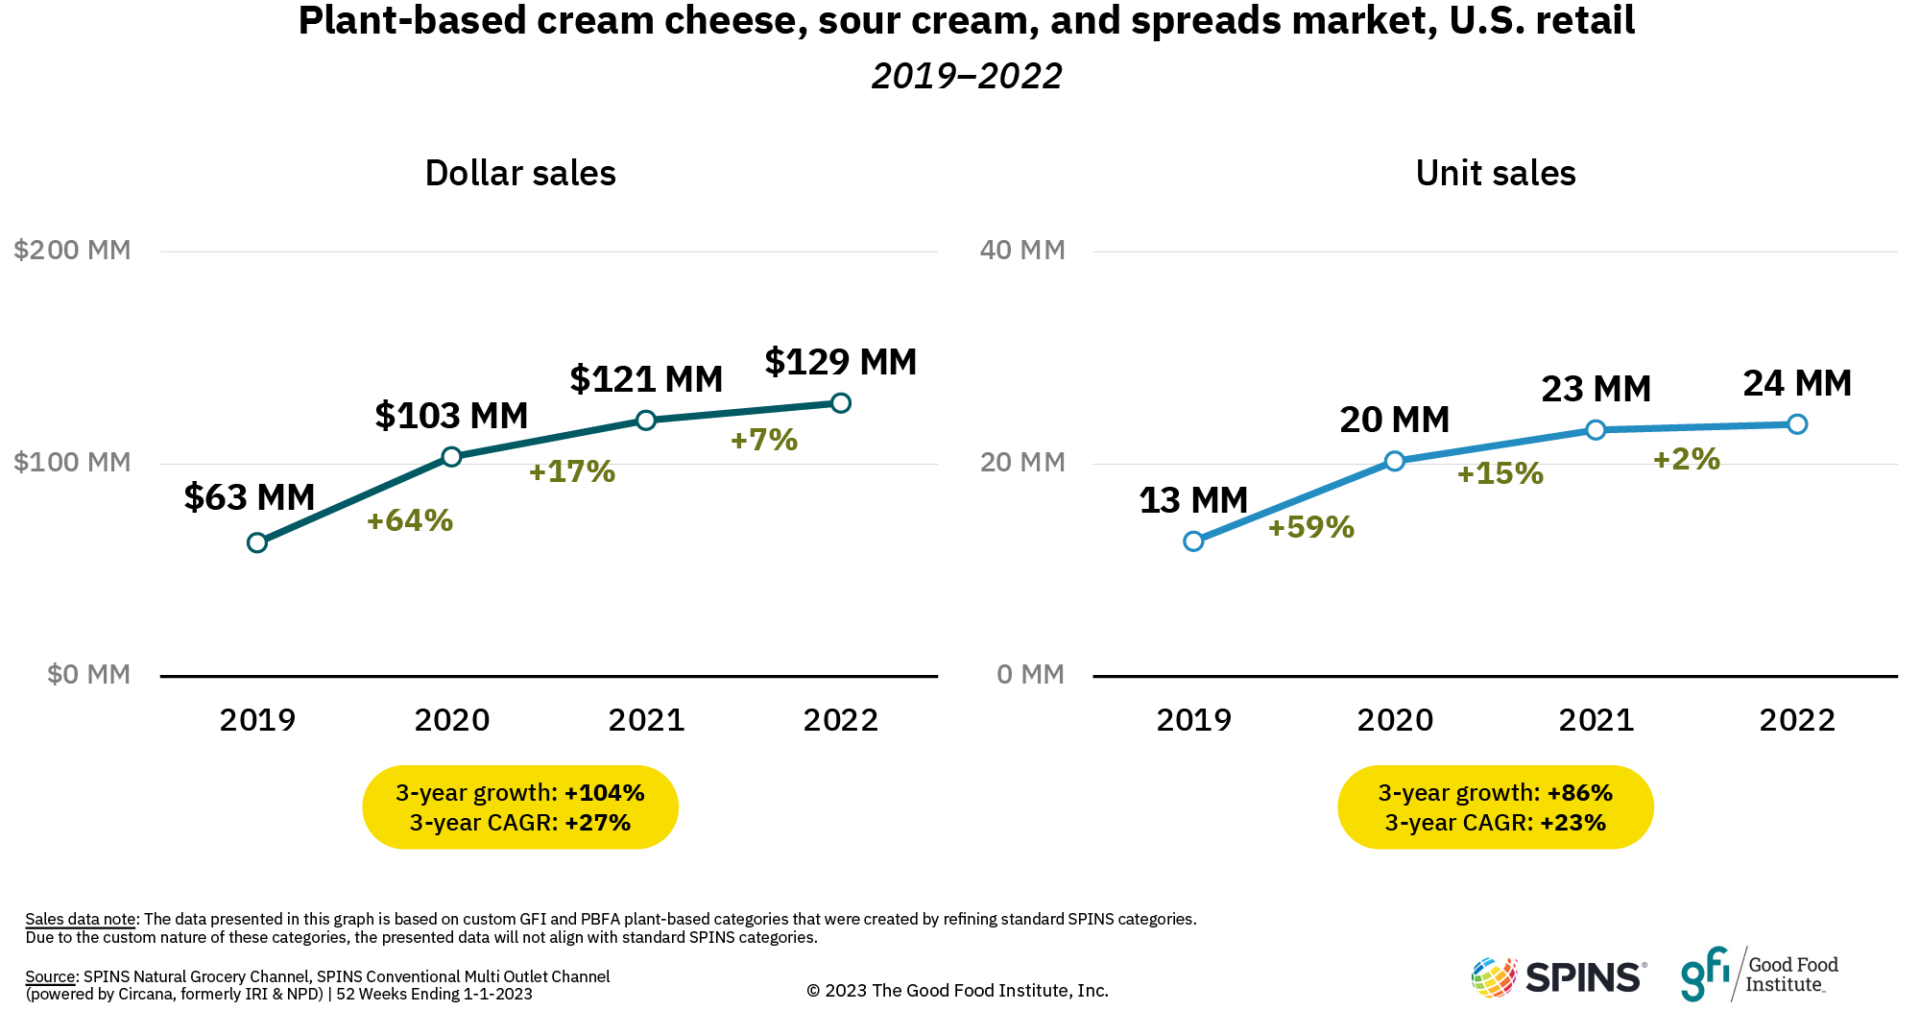 Summary of plant-based dairy spreads, dips, sour cream, and sauces sales data